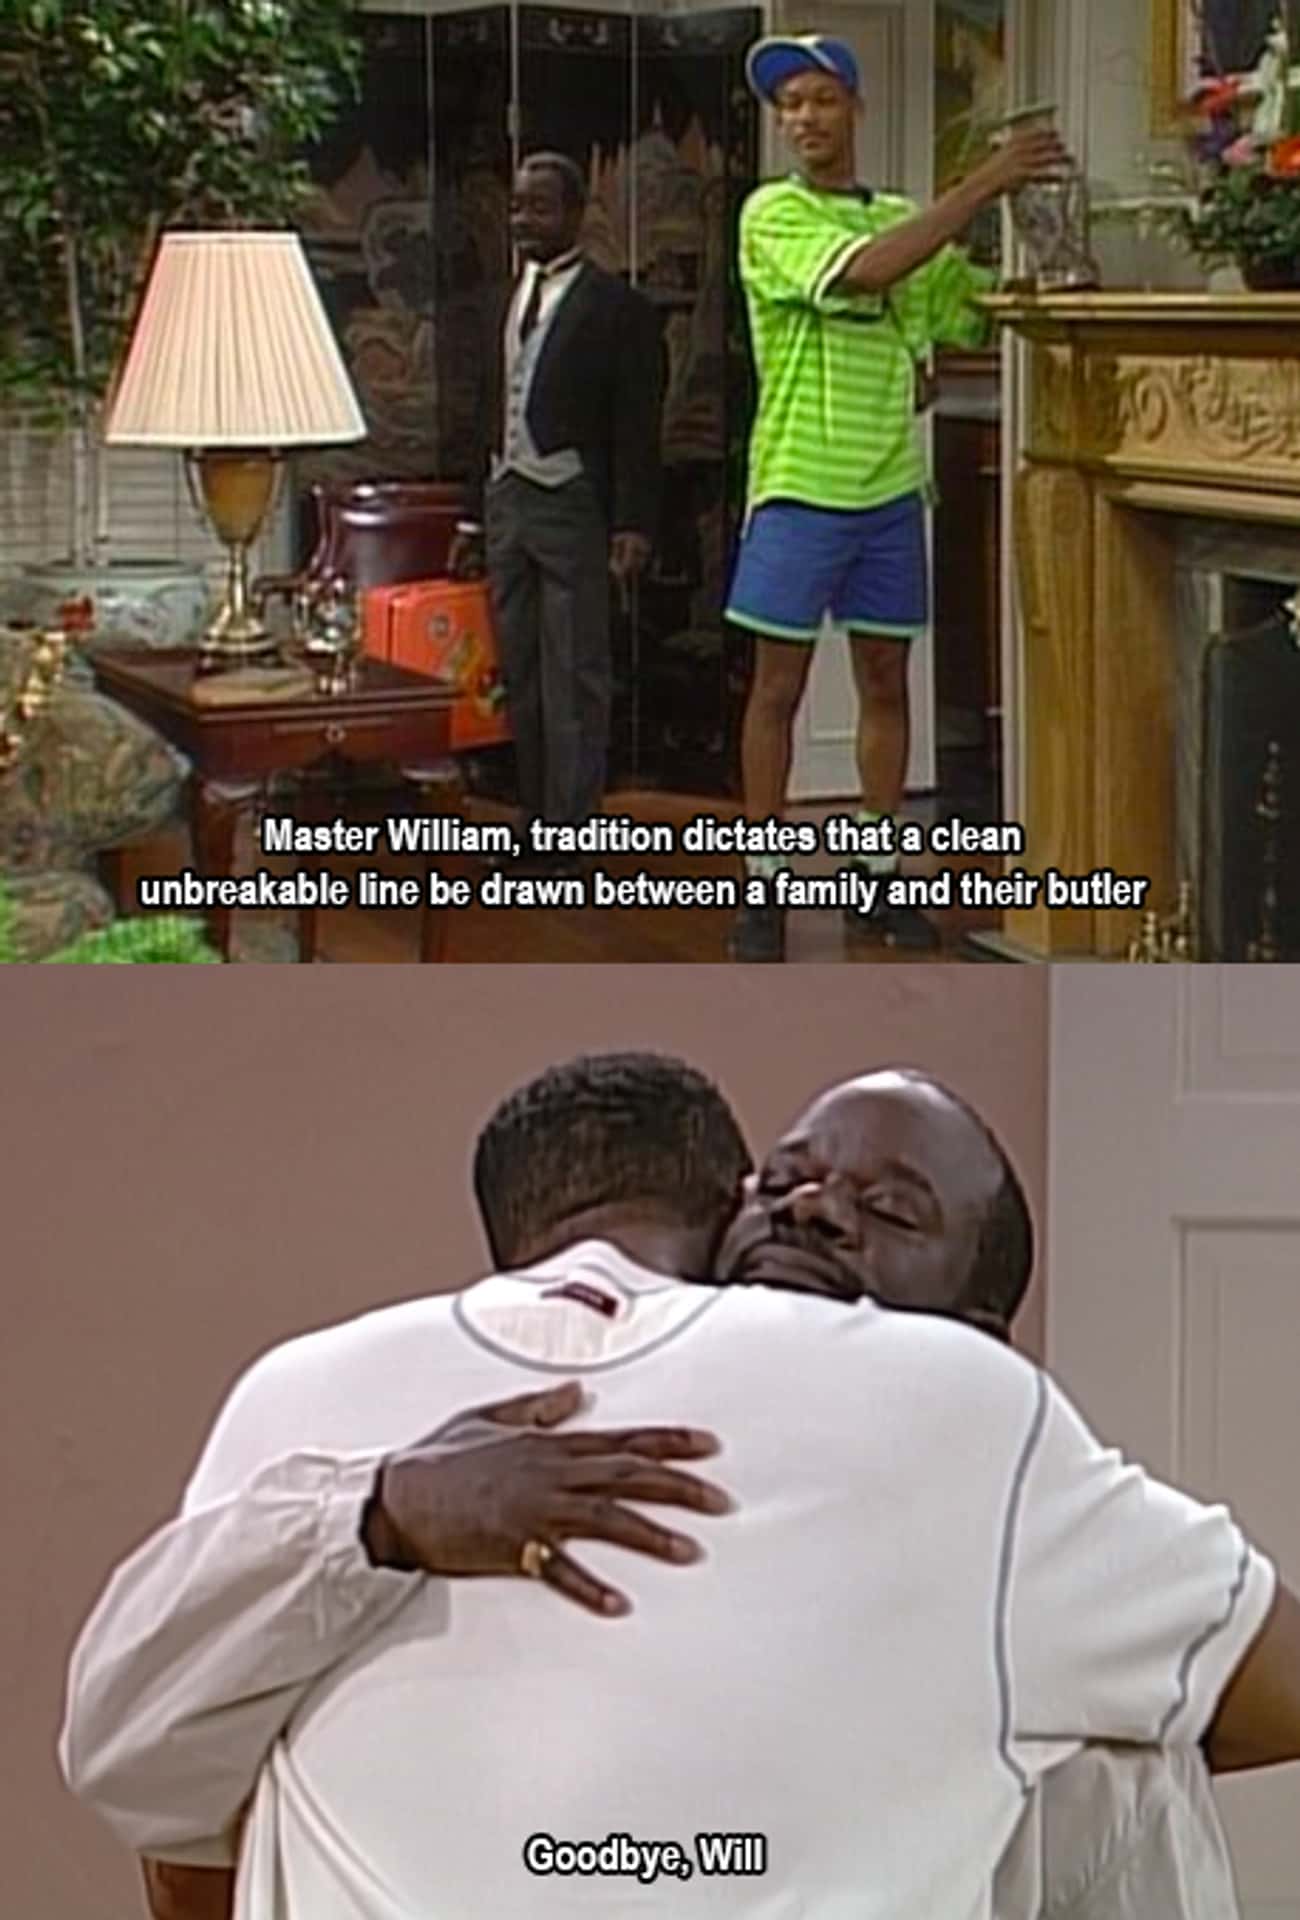  In 'The Fresh Prince of Bel-Air,' Geoffrey Calls Will ‘Will’ And Not ‘Master William’ For The Only Time In The Entire Series